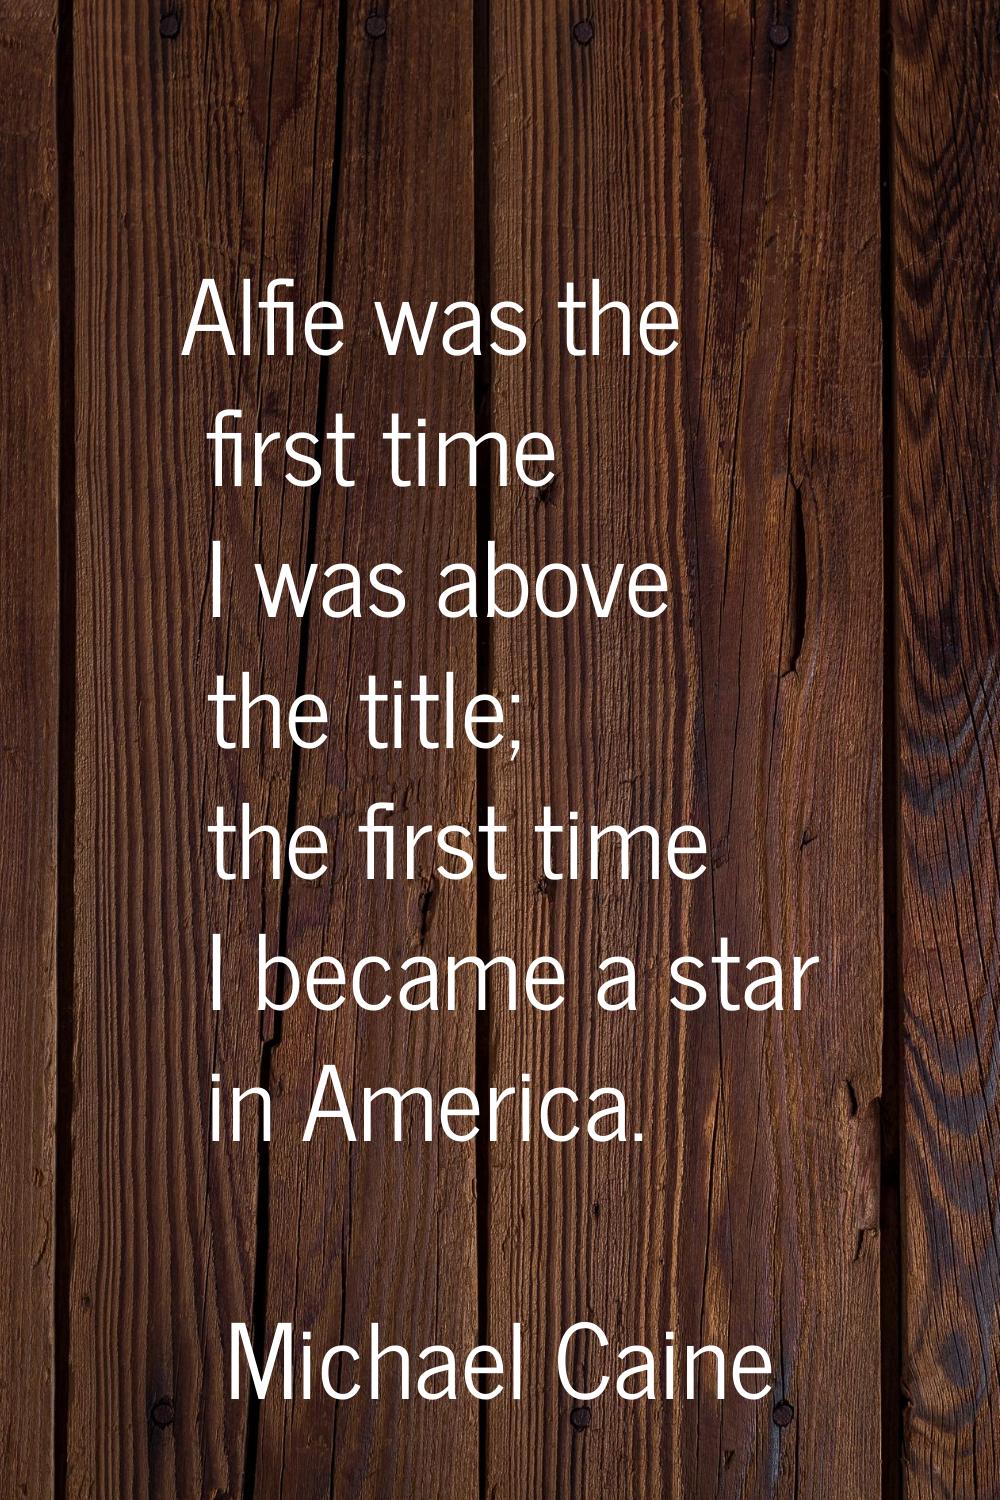 Alfie was the first time I was above the title; the first time I became a star in America.